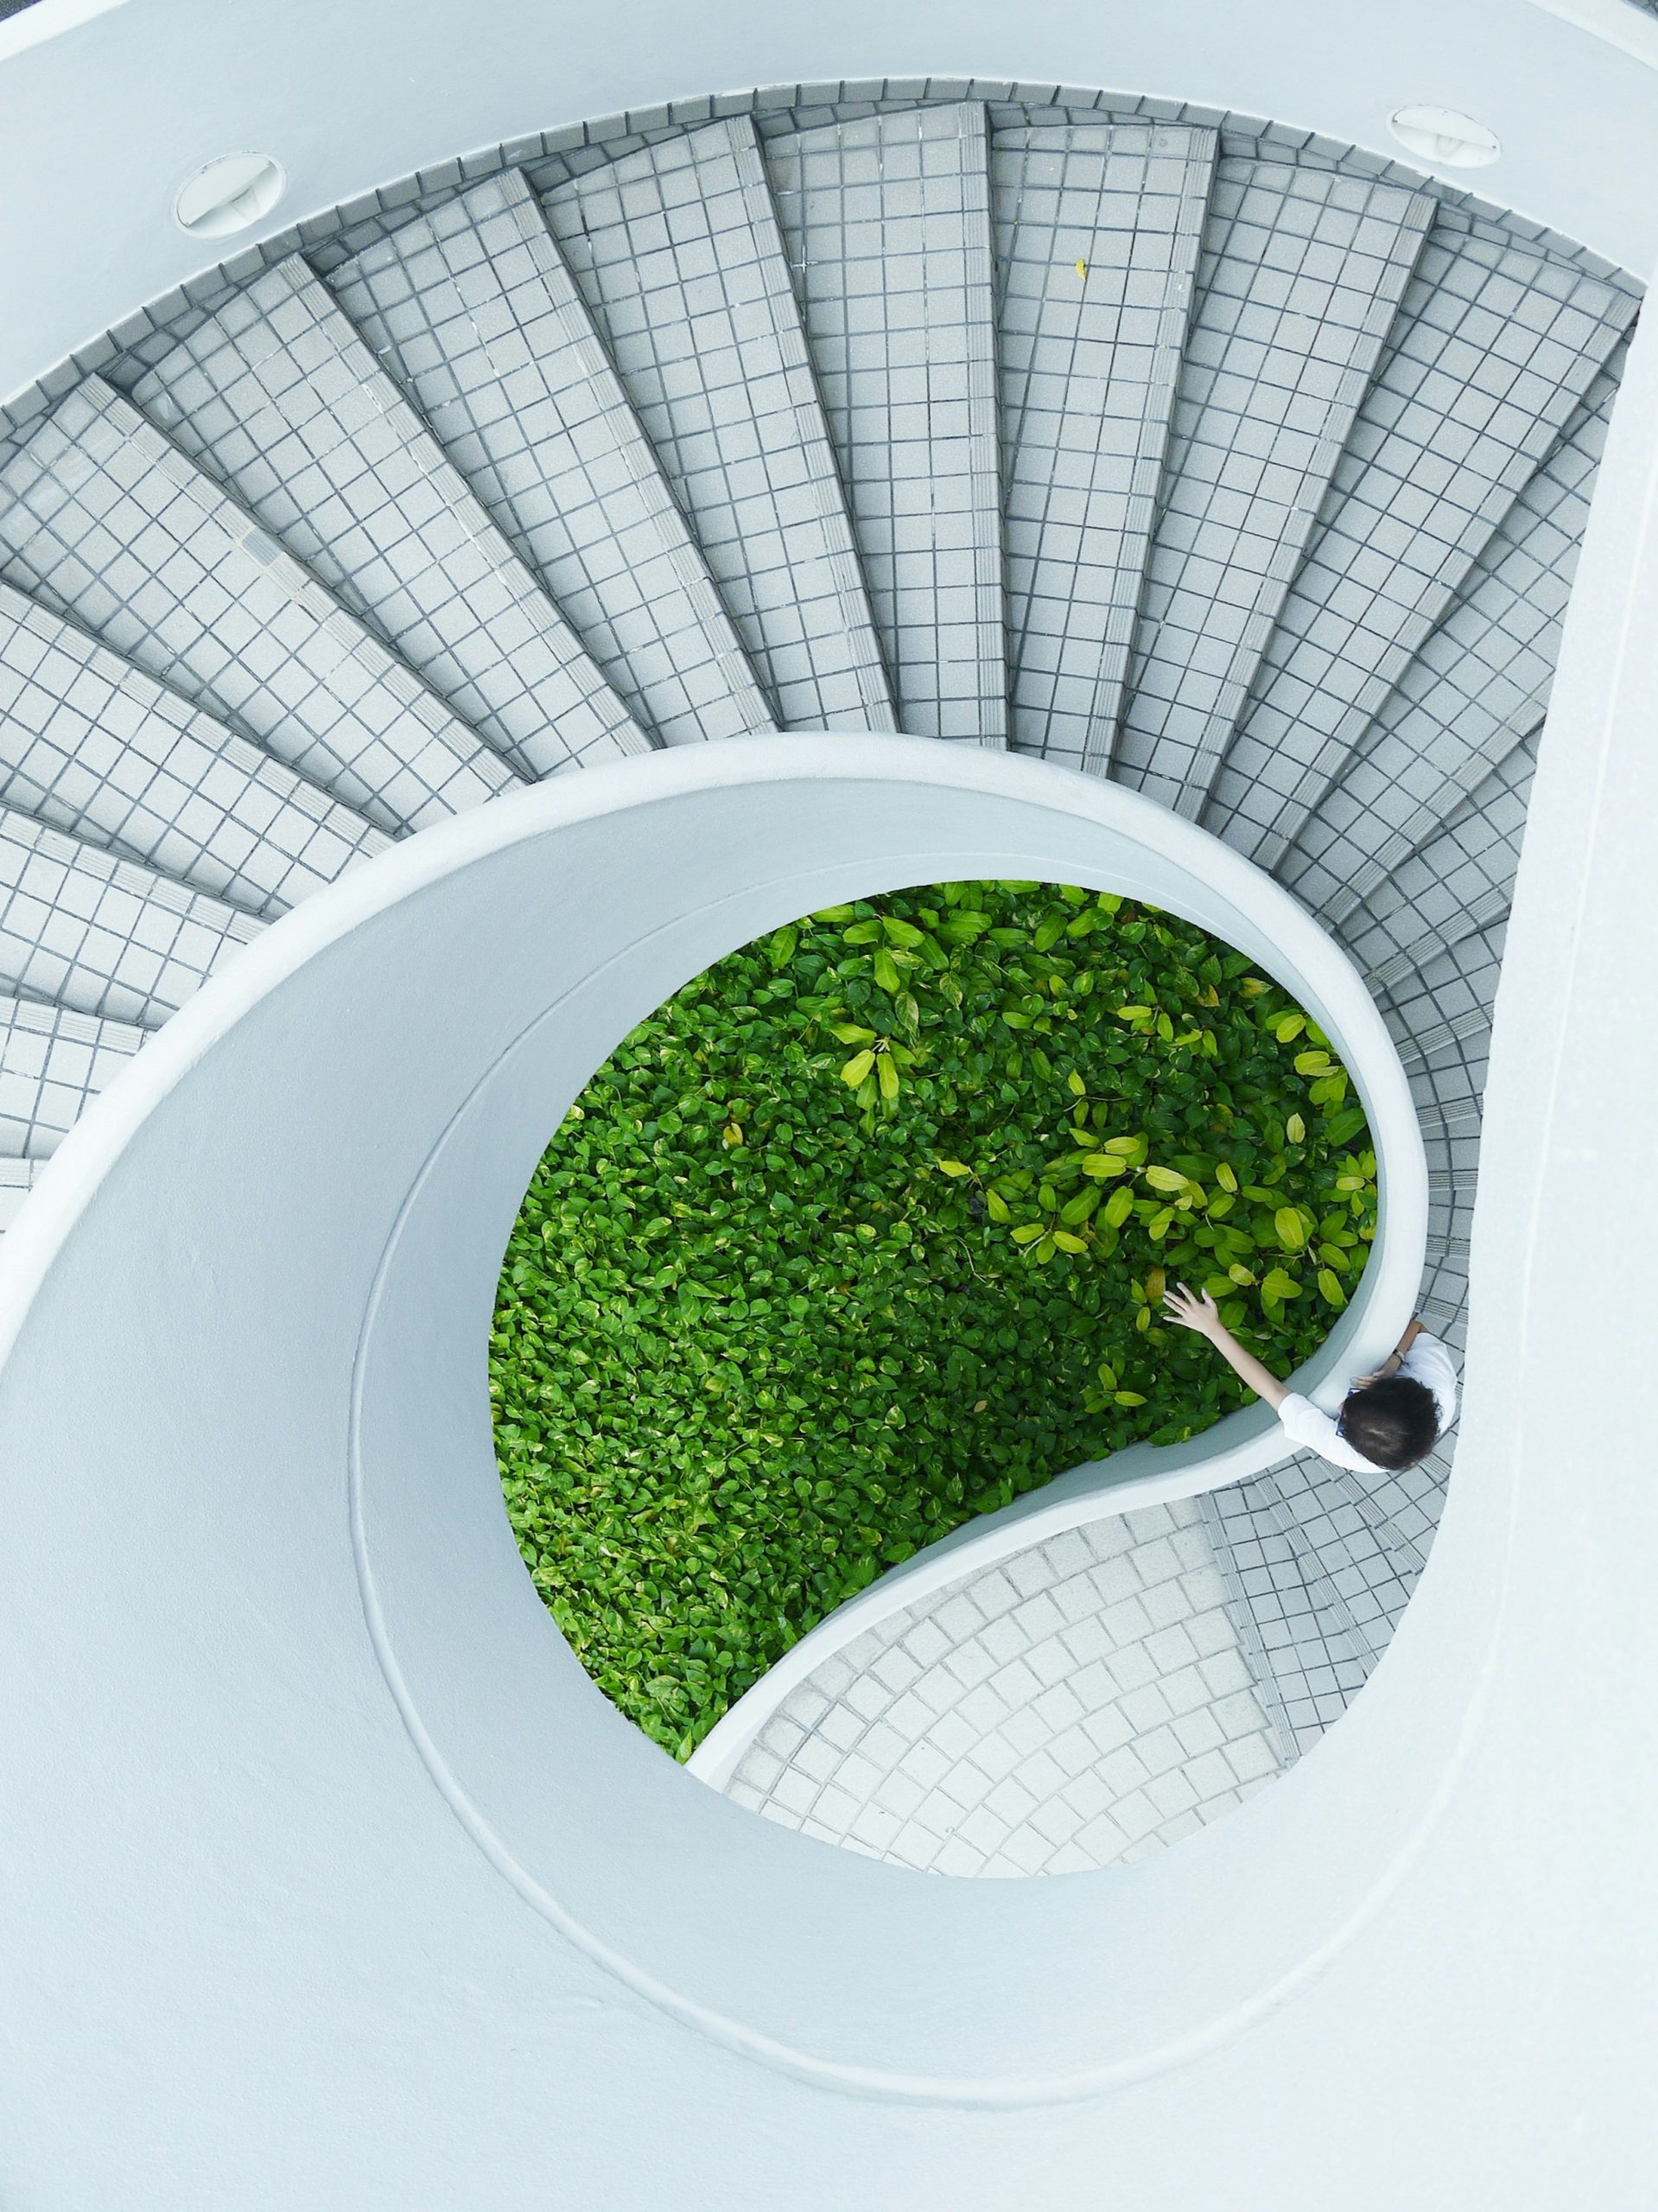 How Do Green Building Certifications Impact Sustainable Architecture?